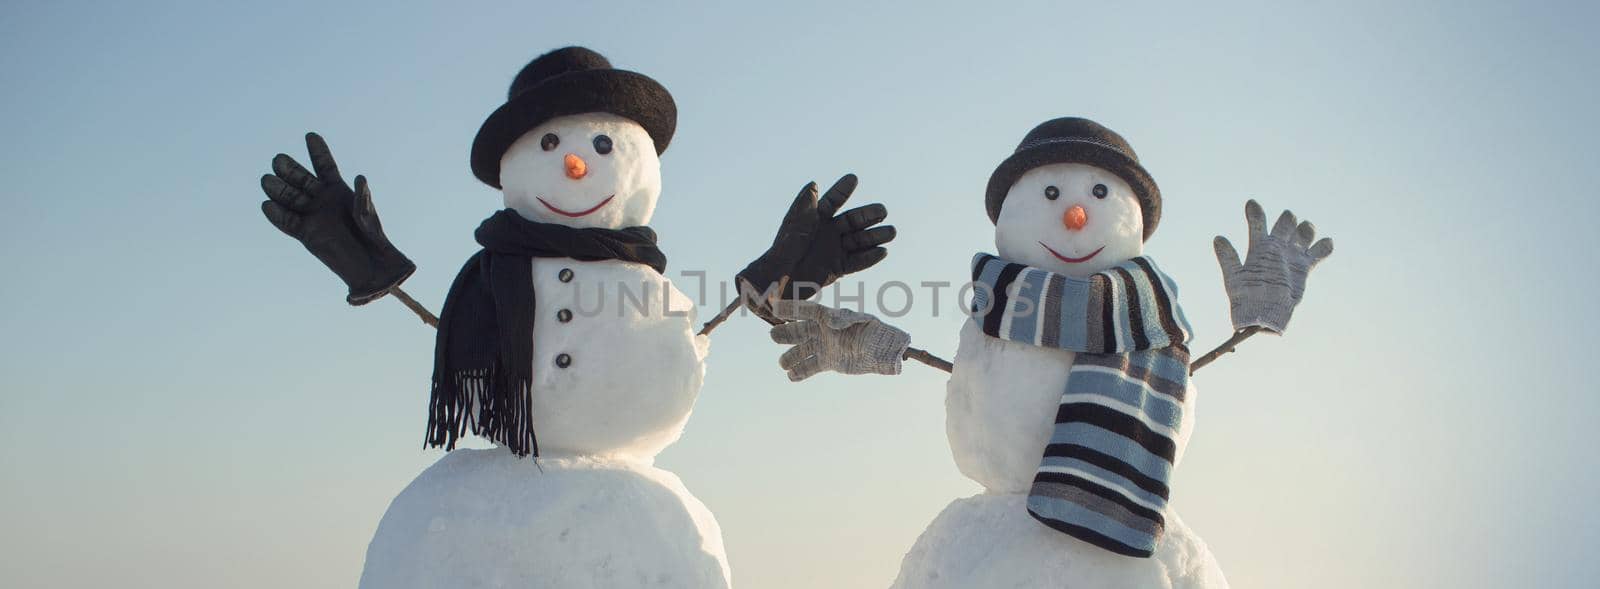 Couple snowman with hat and scarf in winter outdoor. New year snowmen from snow in santa hat. by Tverdokhlib